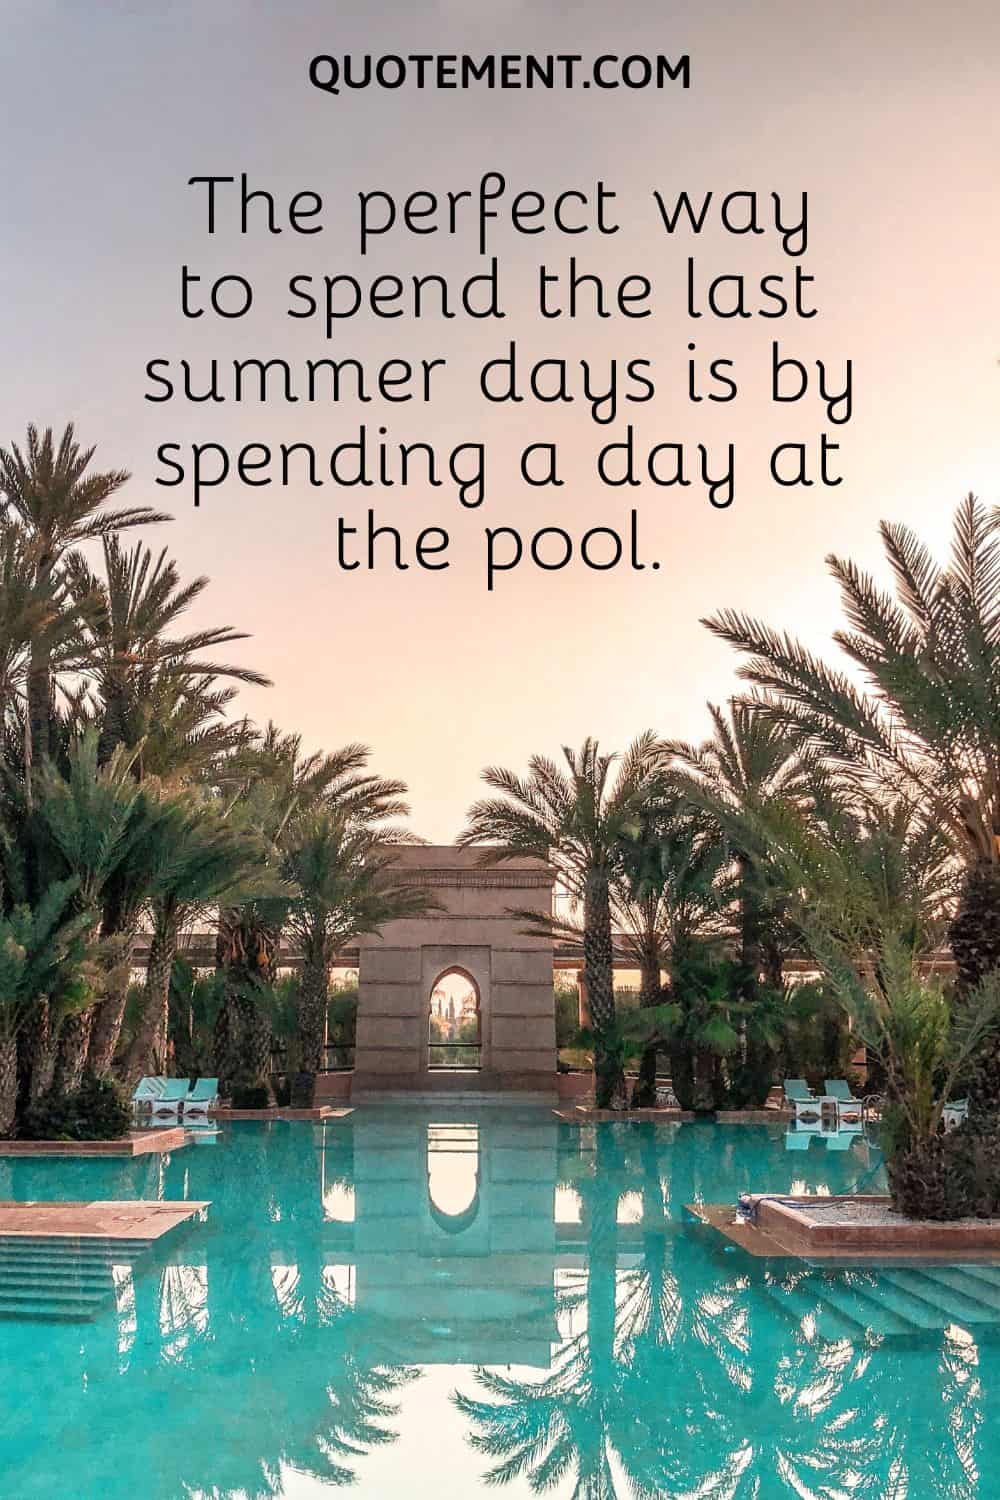 The perfect way to spend the last summer days is by spending a day at the pool.